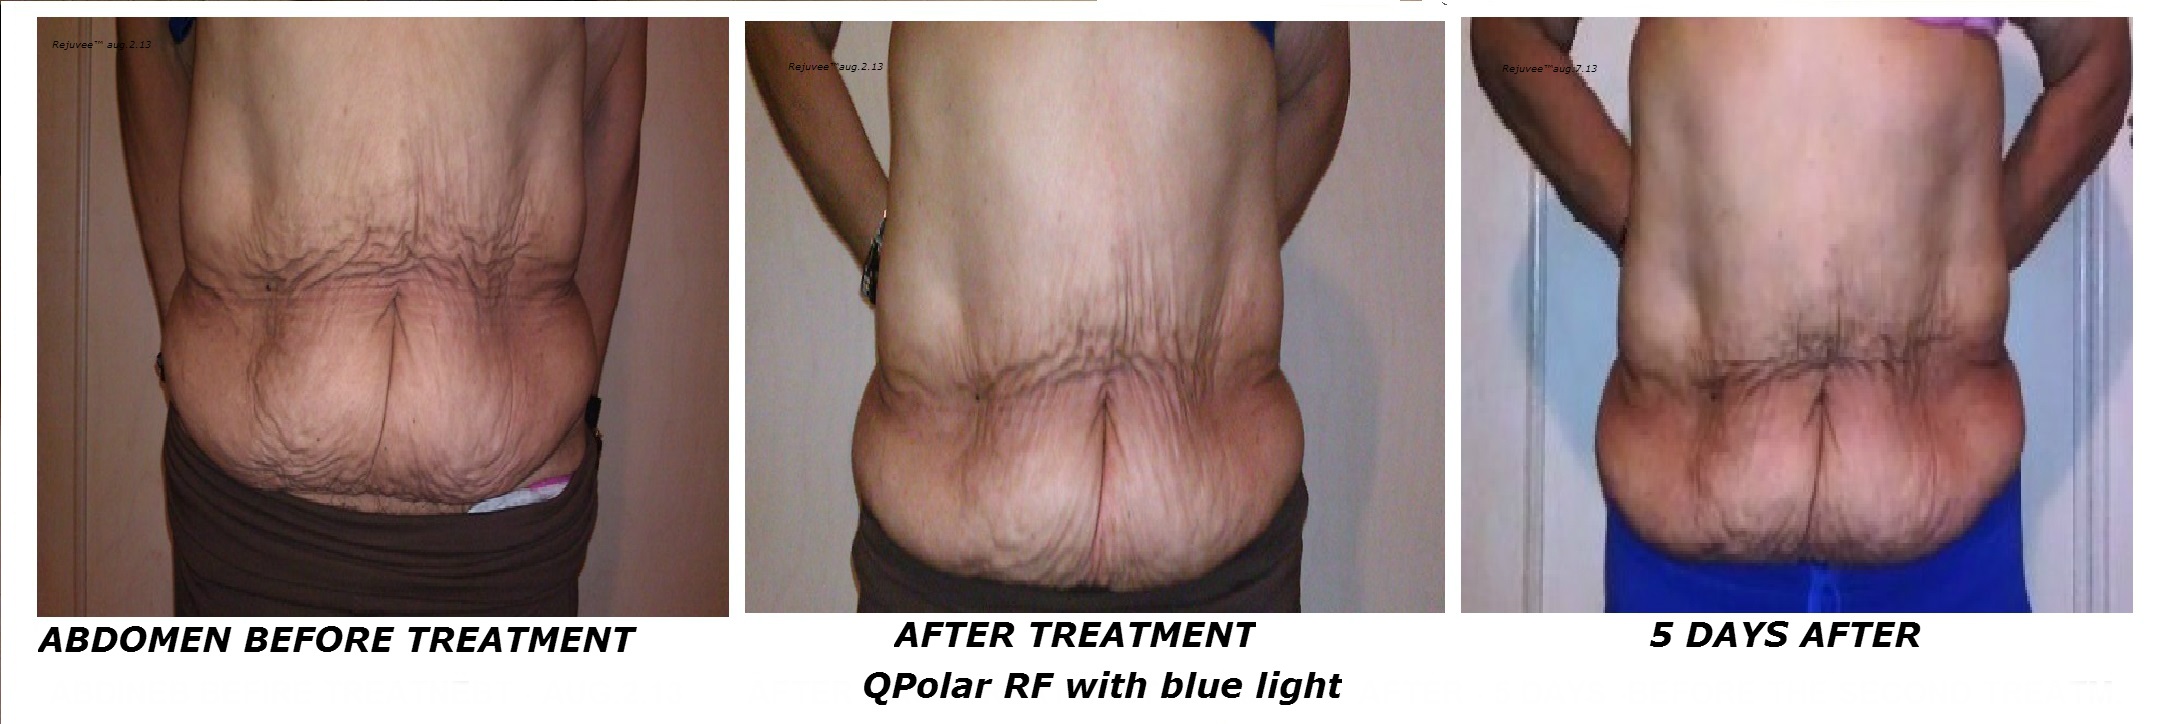  Before and After the treatment QPolar RF 